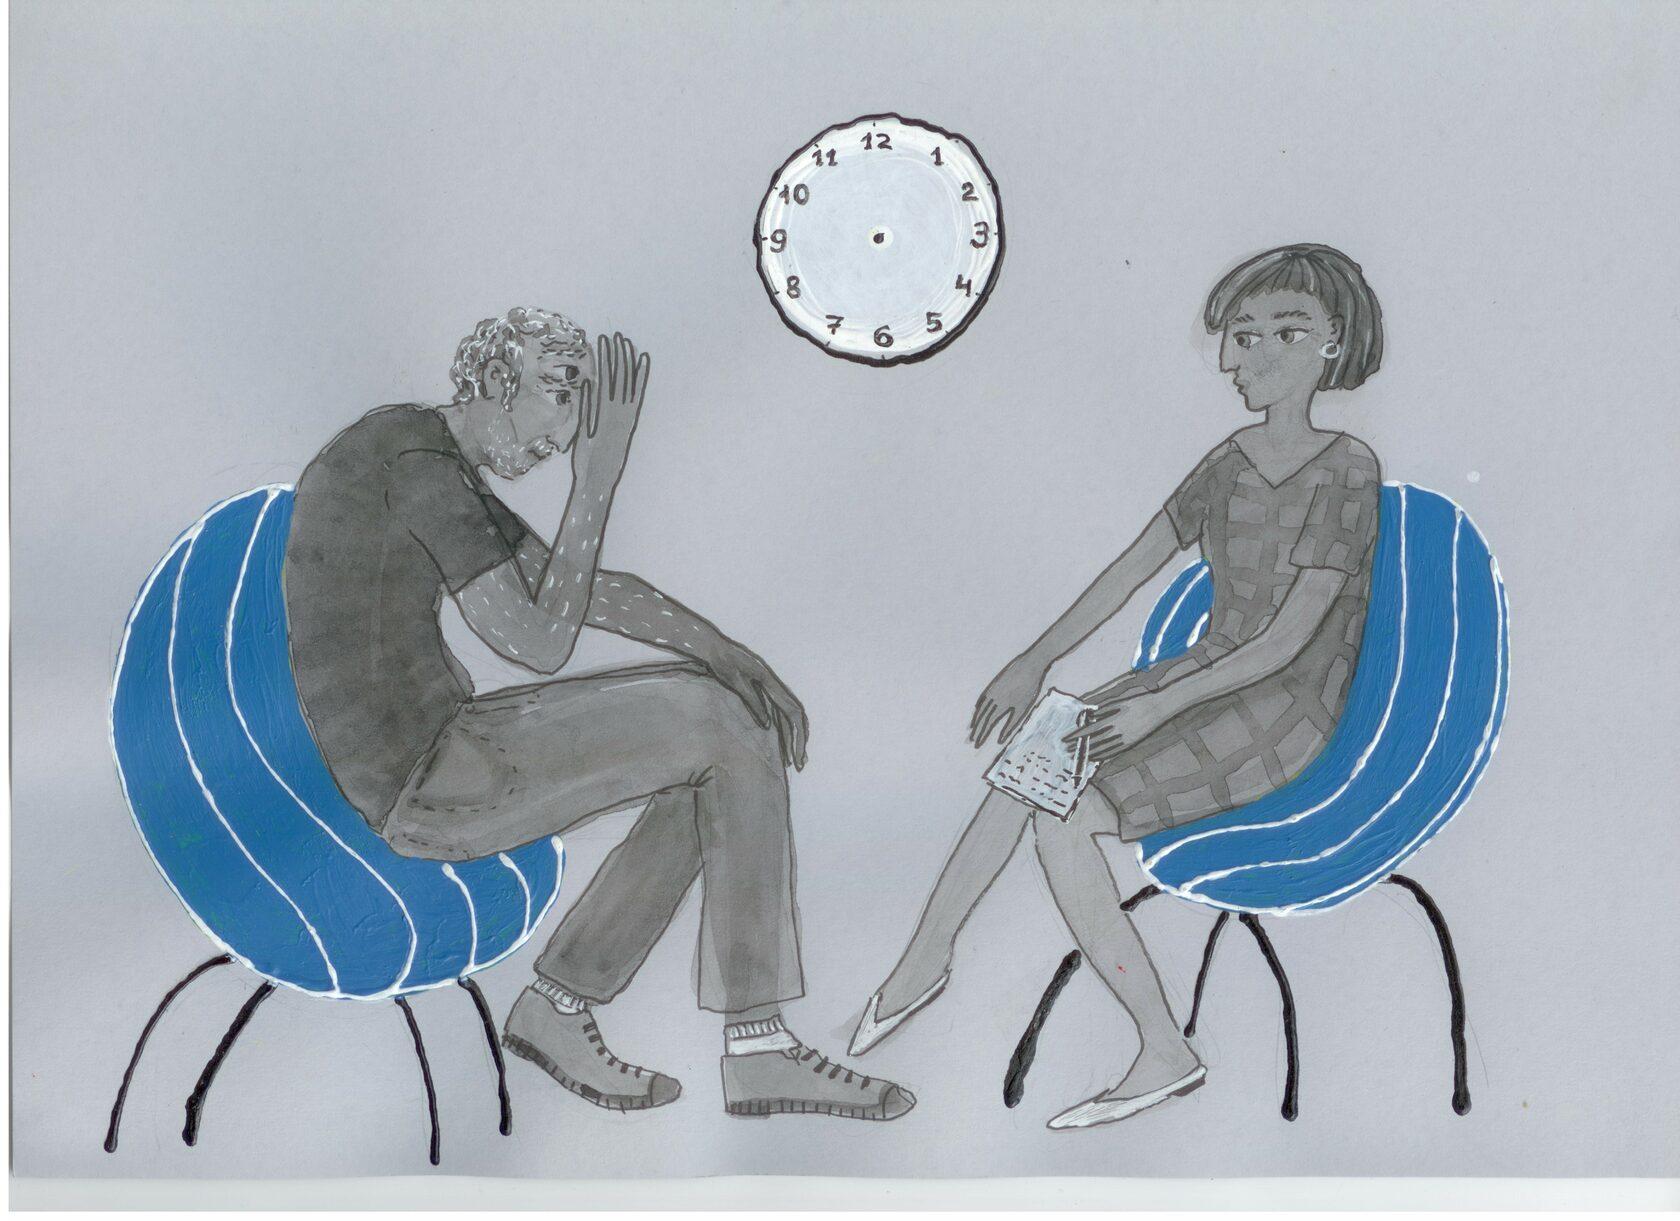 Time in the work of a Gestalt therapist